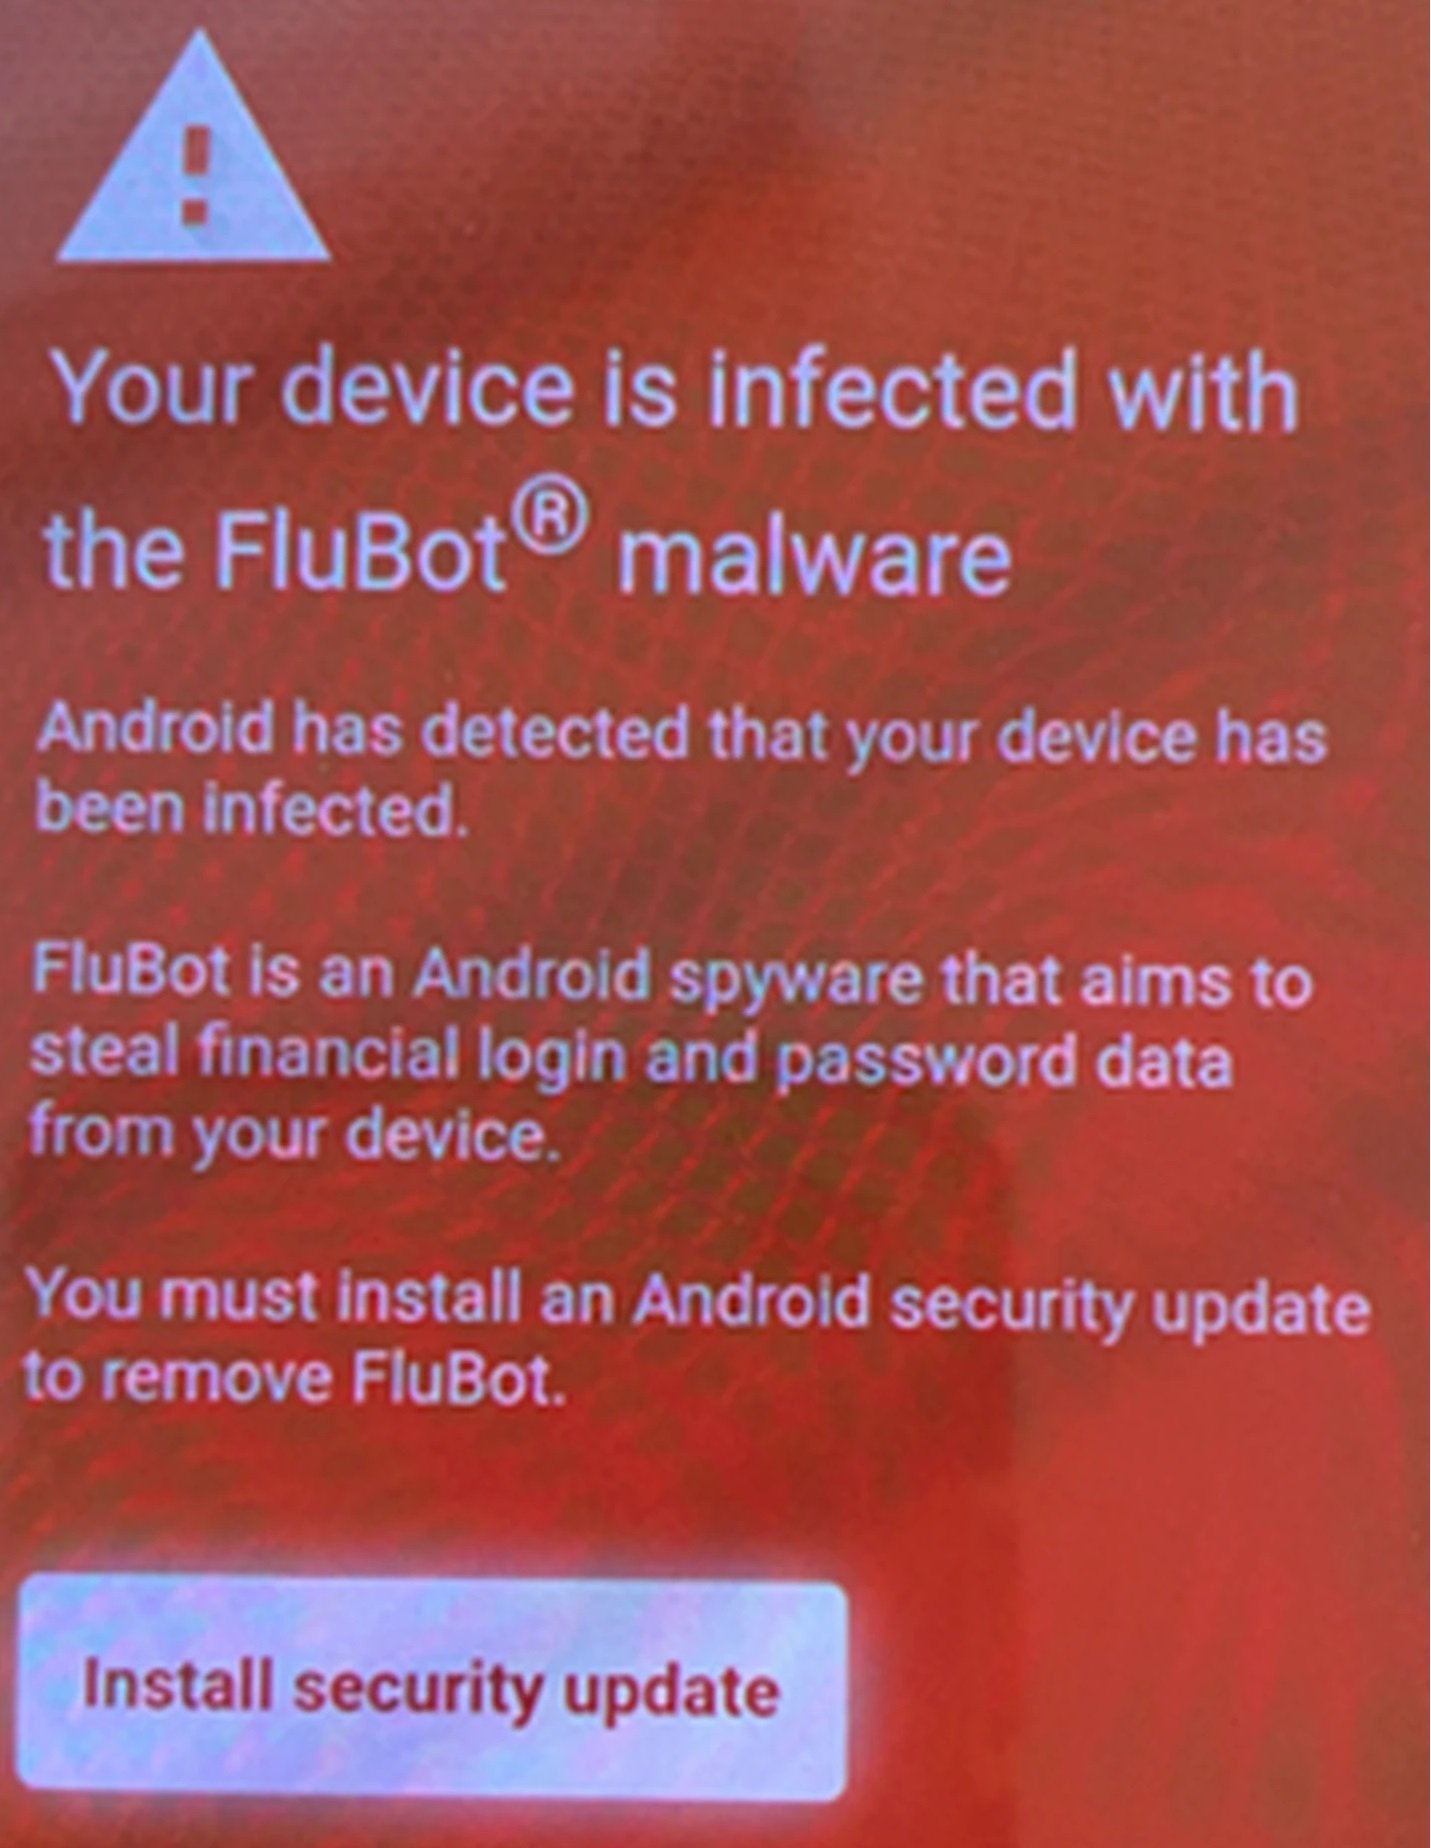 Flubot Scam Webpage with Malware